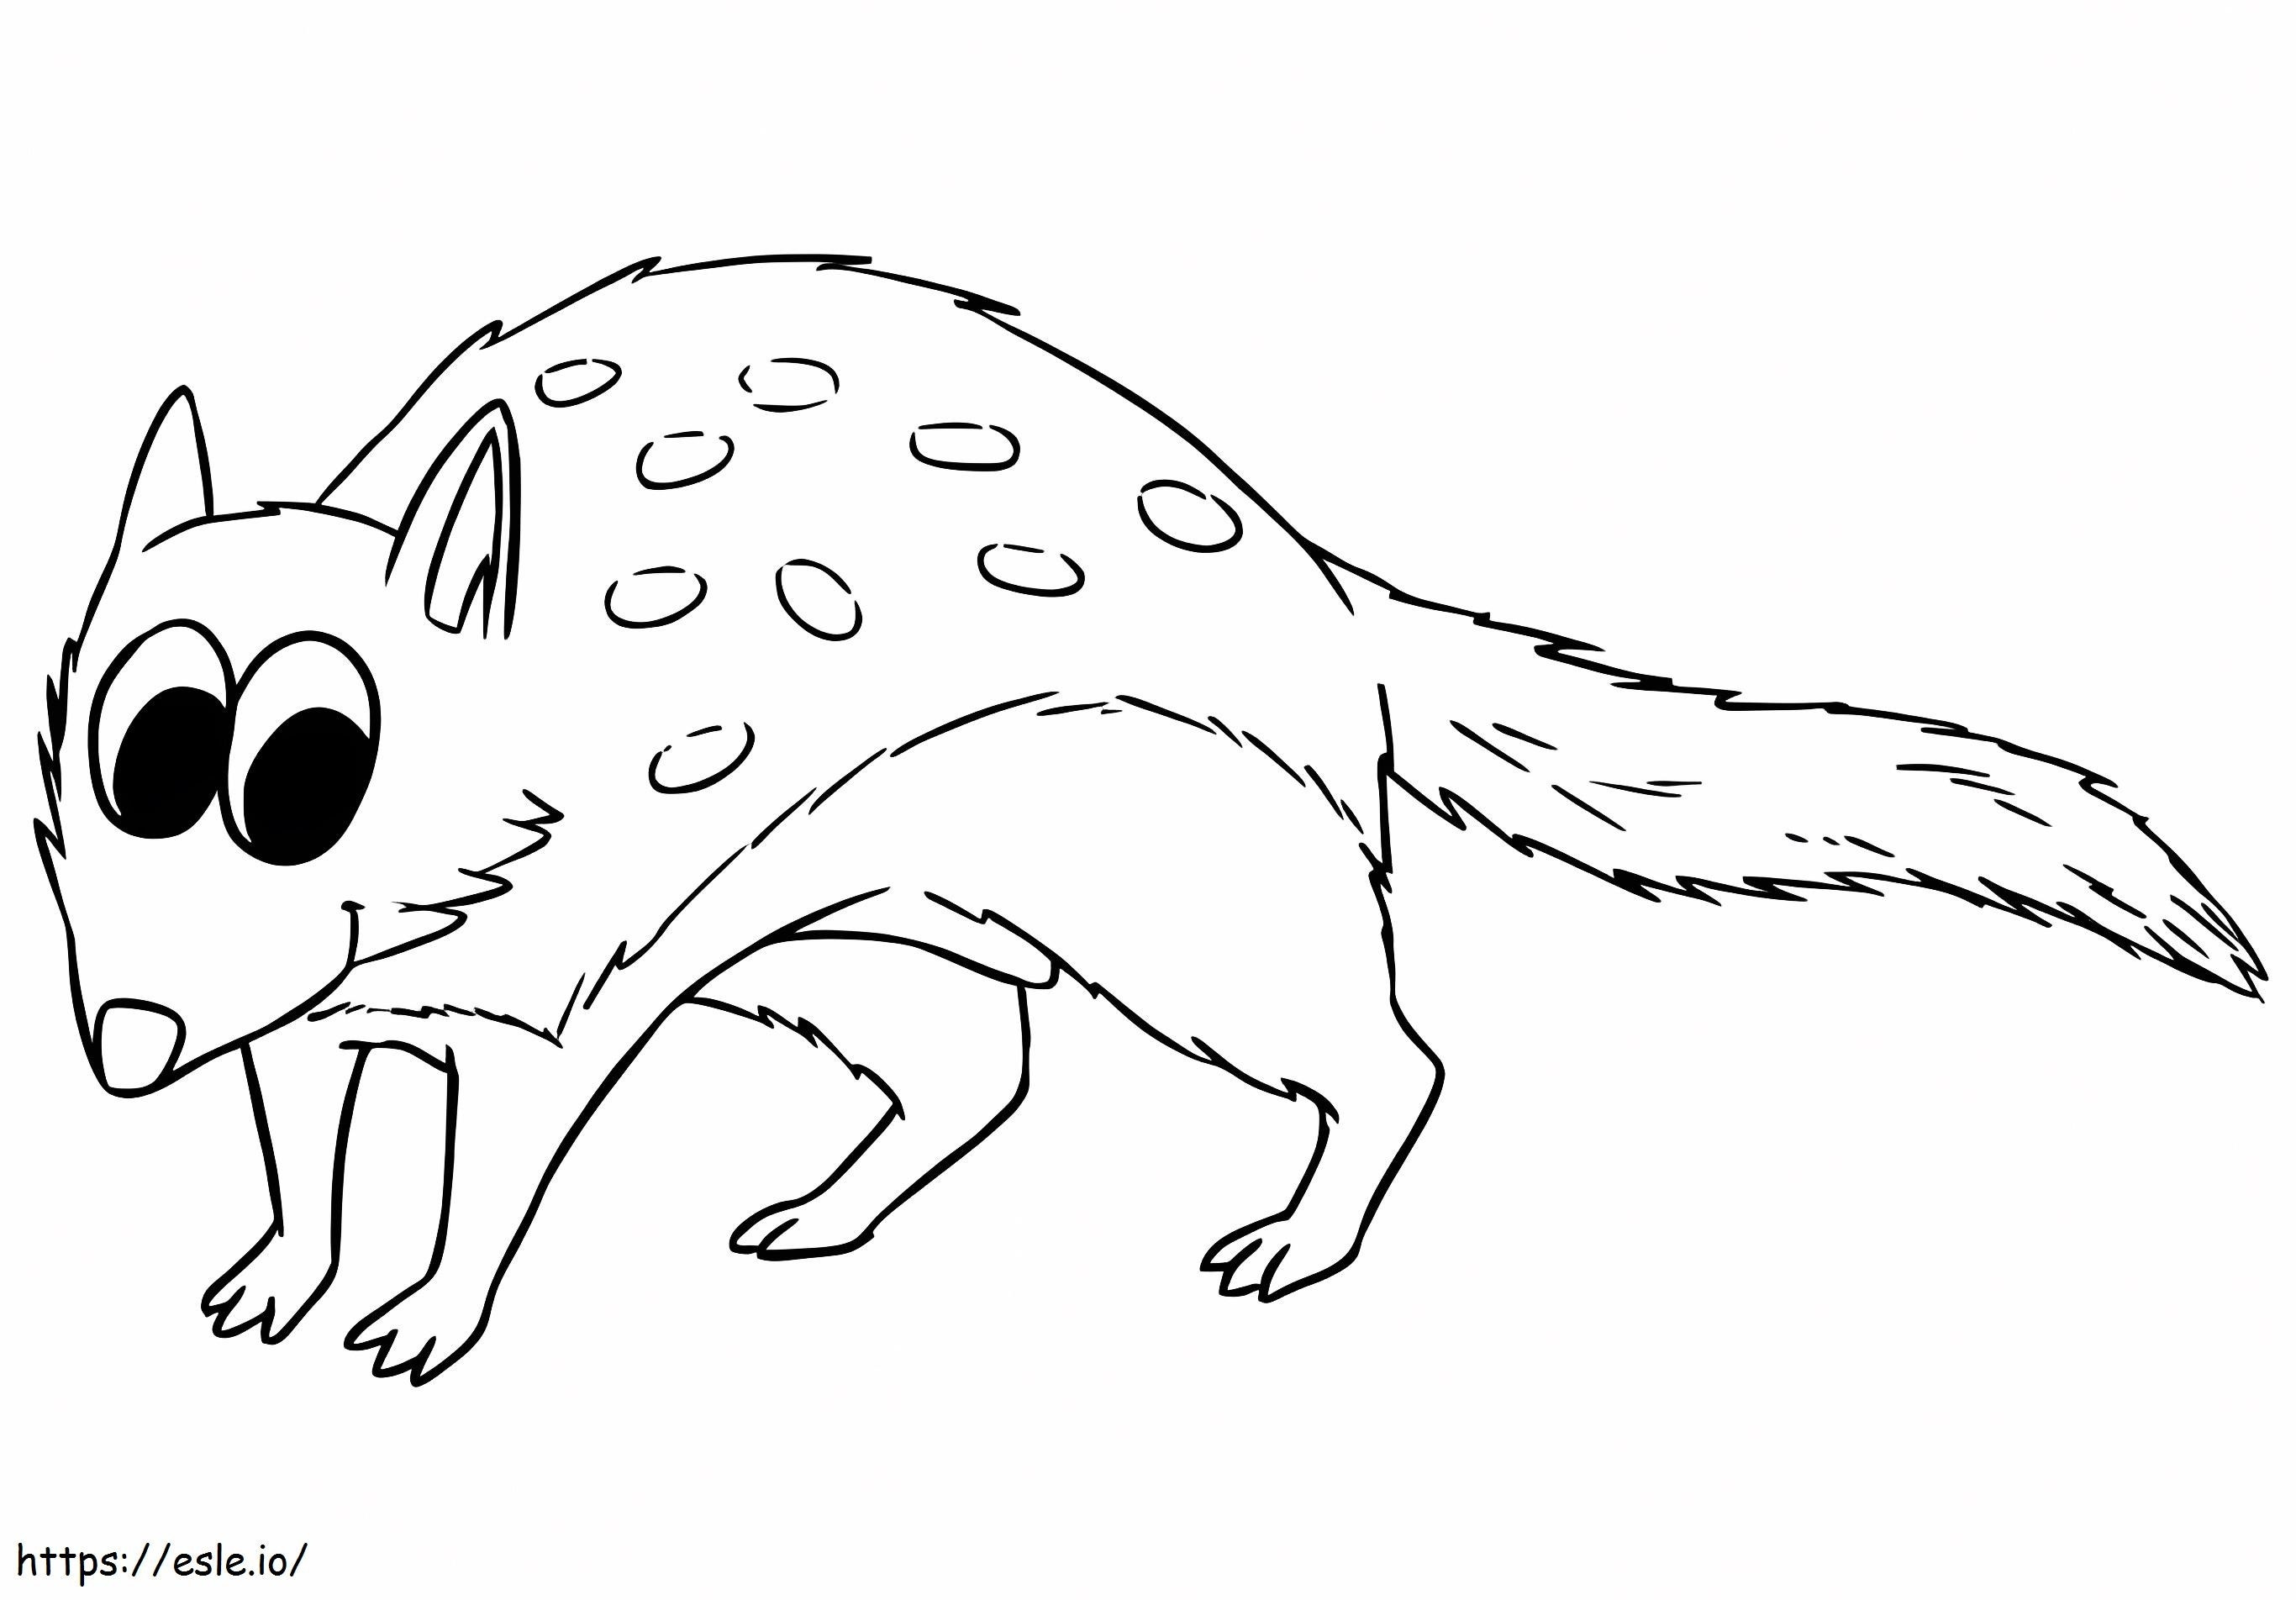 Funny Quoll coloring page